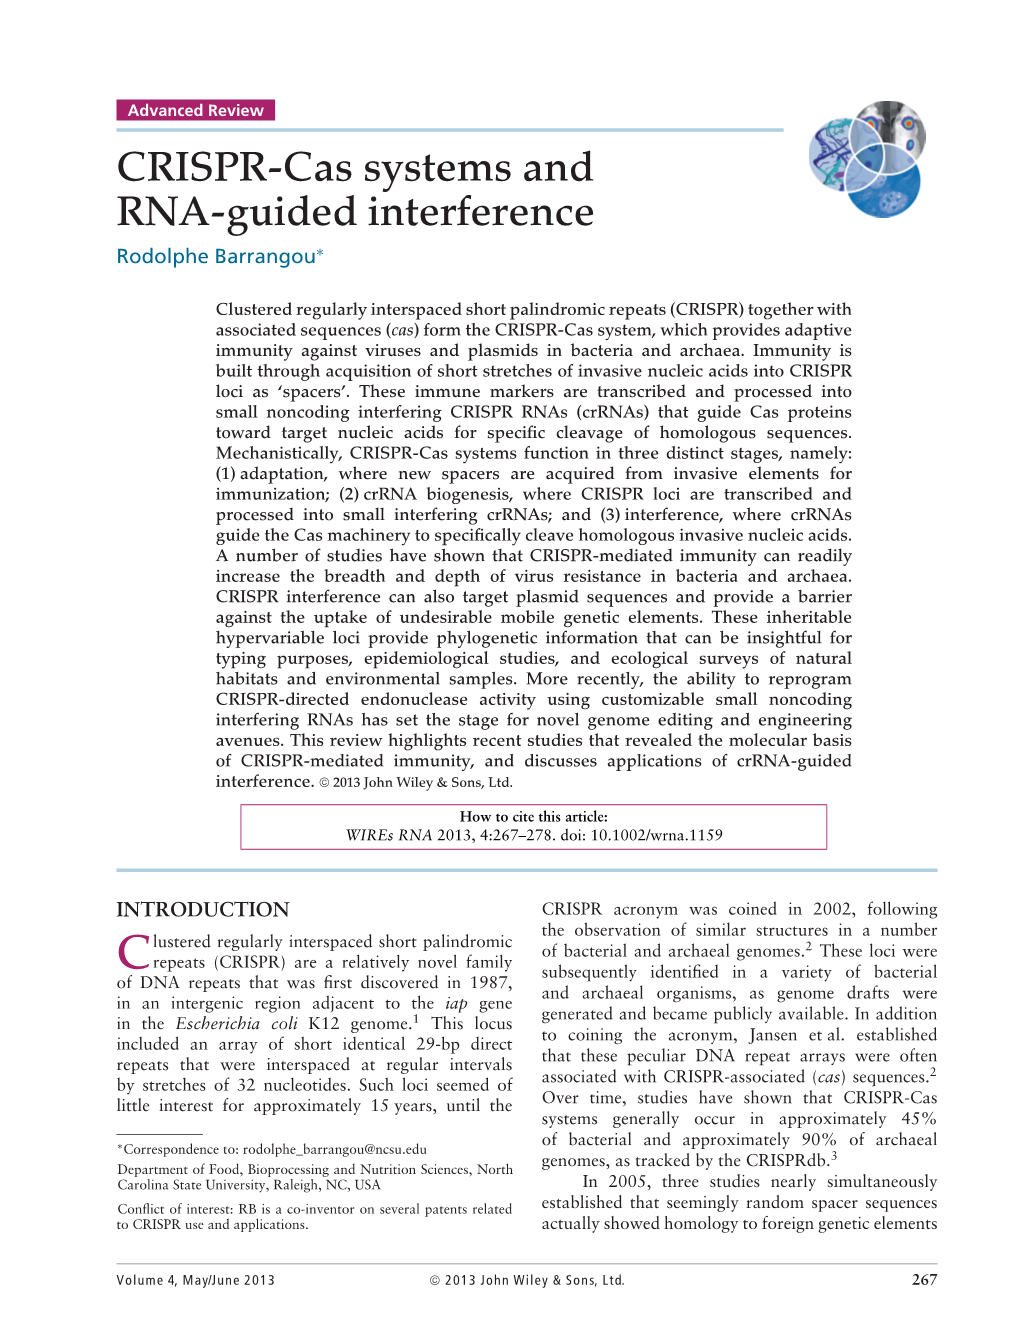 CRISPR-Cas Systems and RNA-Guided Interference Rodolphe Barrangou∗